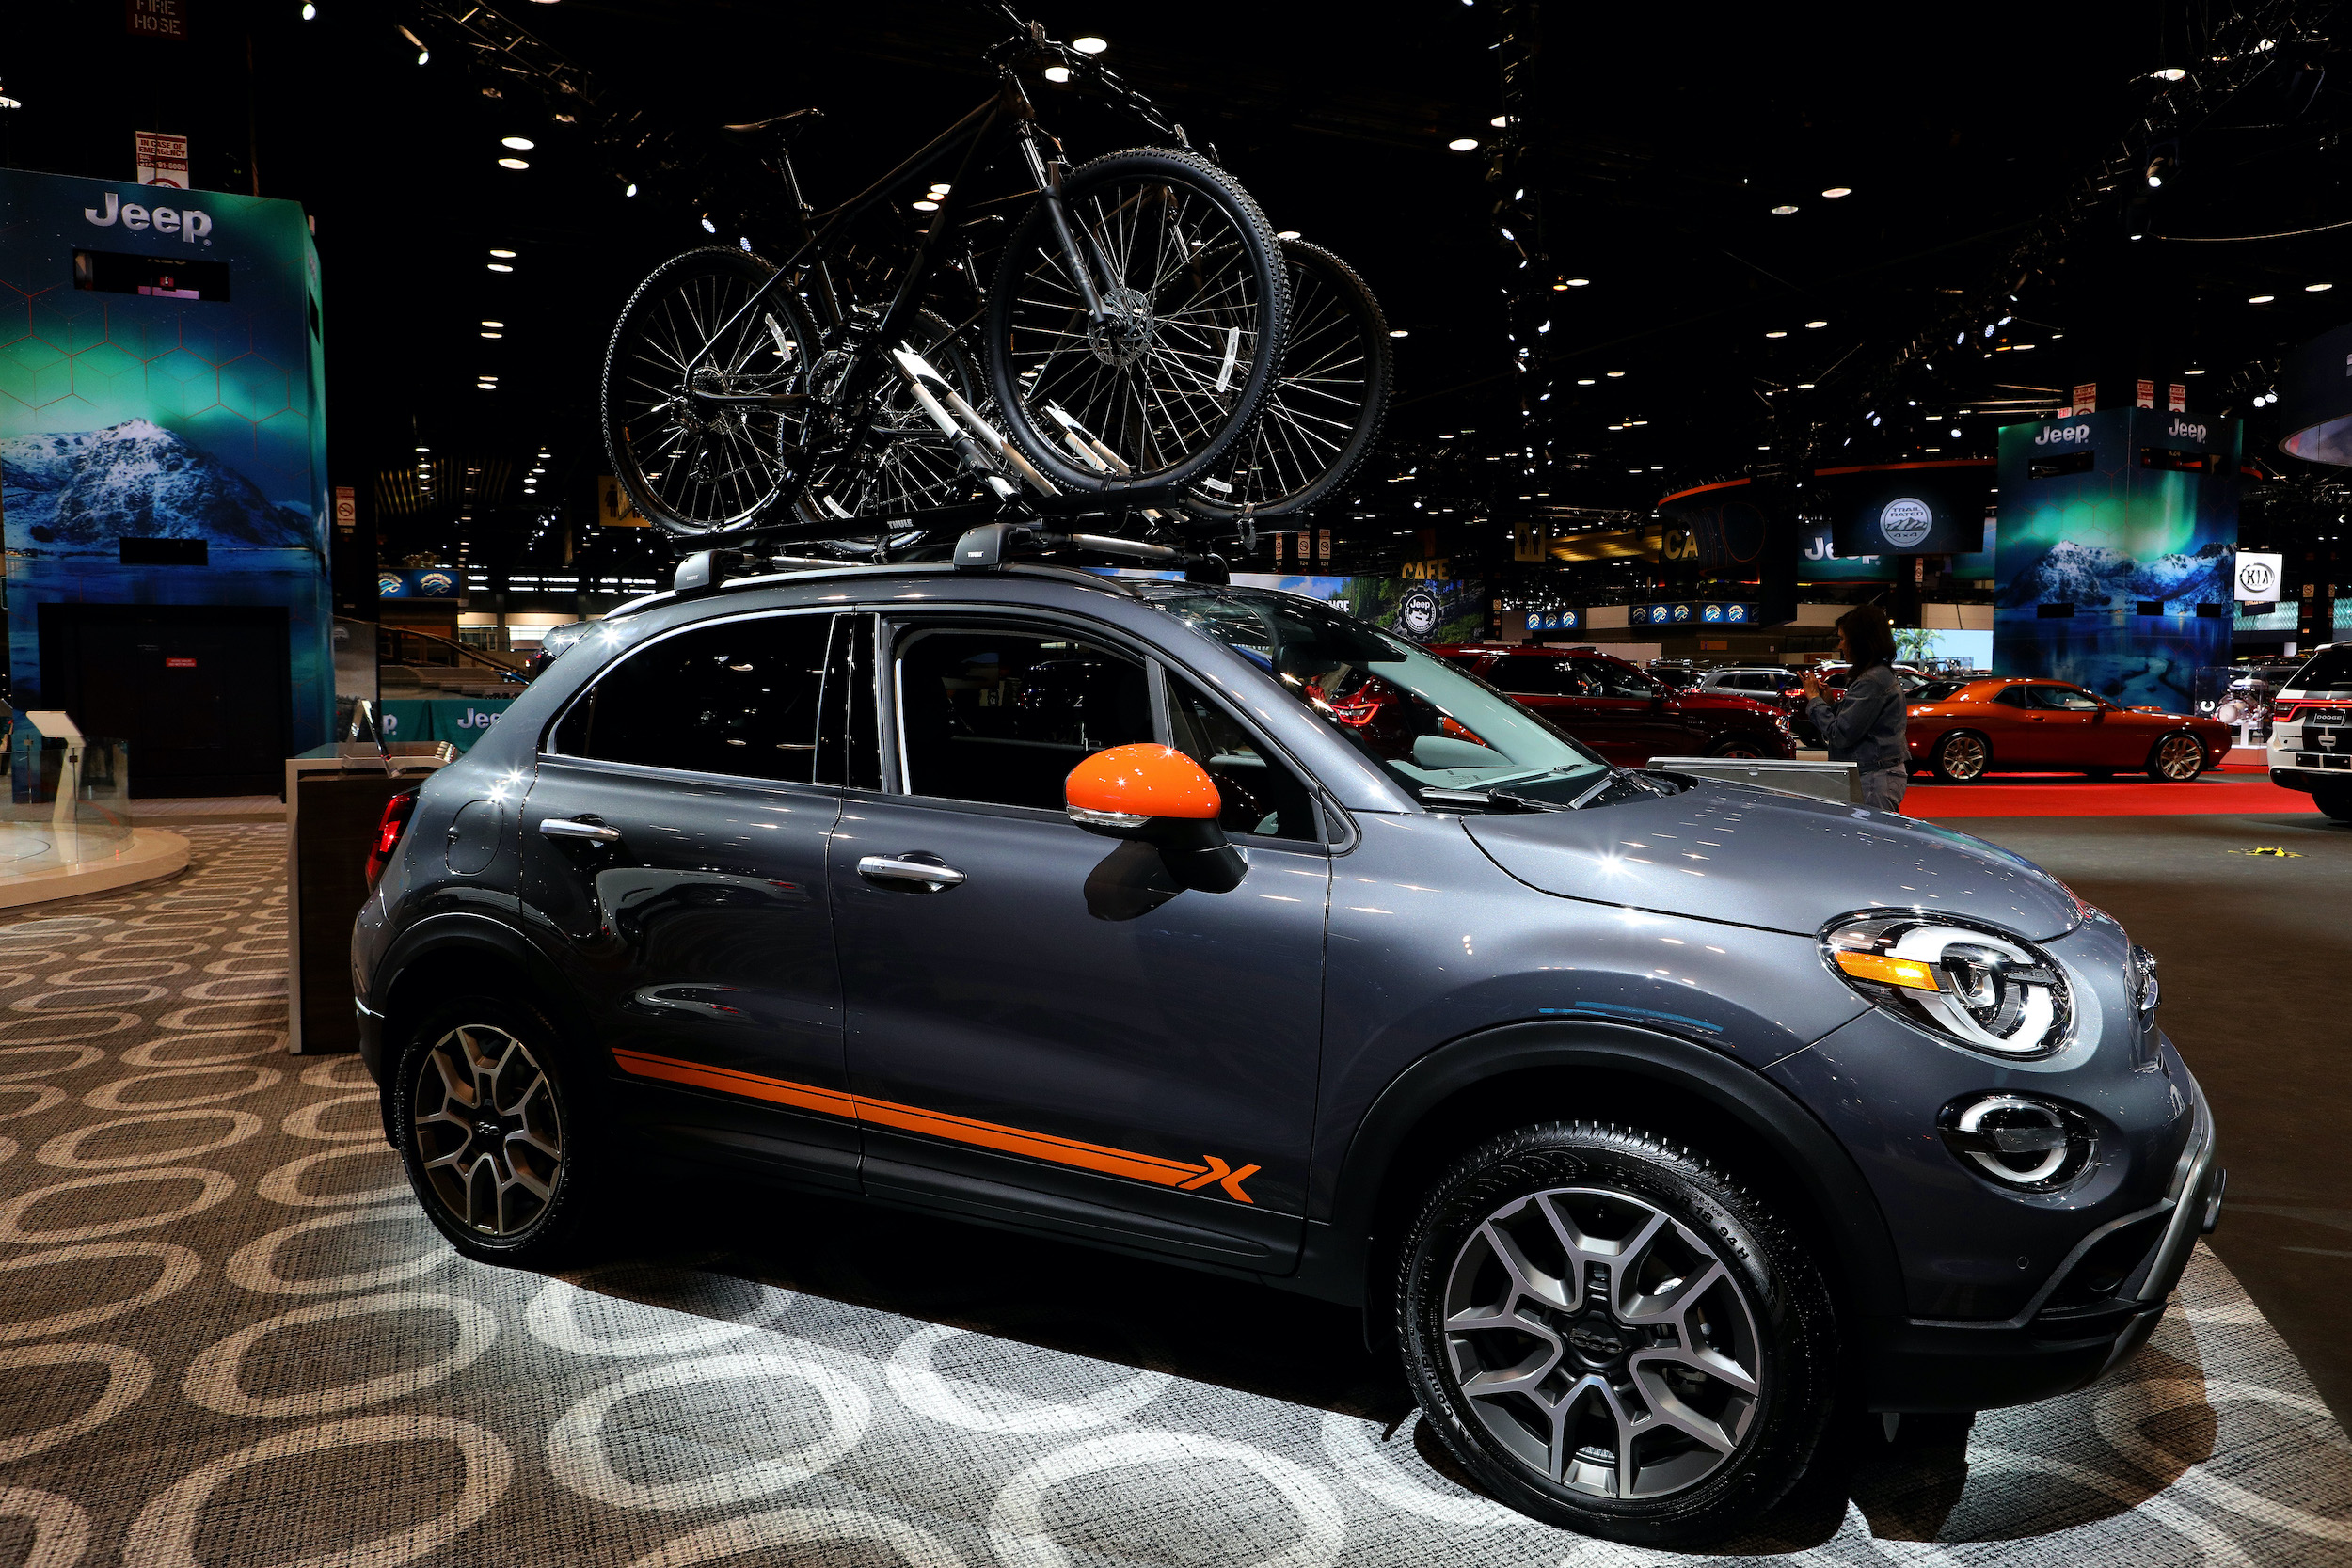 a Fiat 500 X on display with bicycles on top